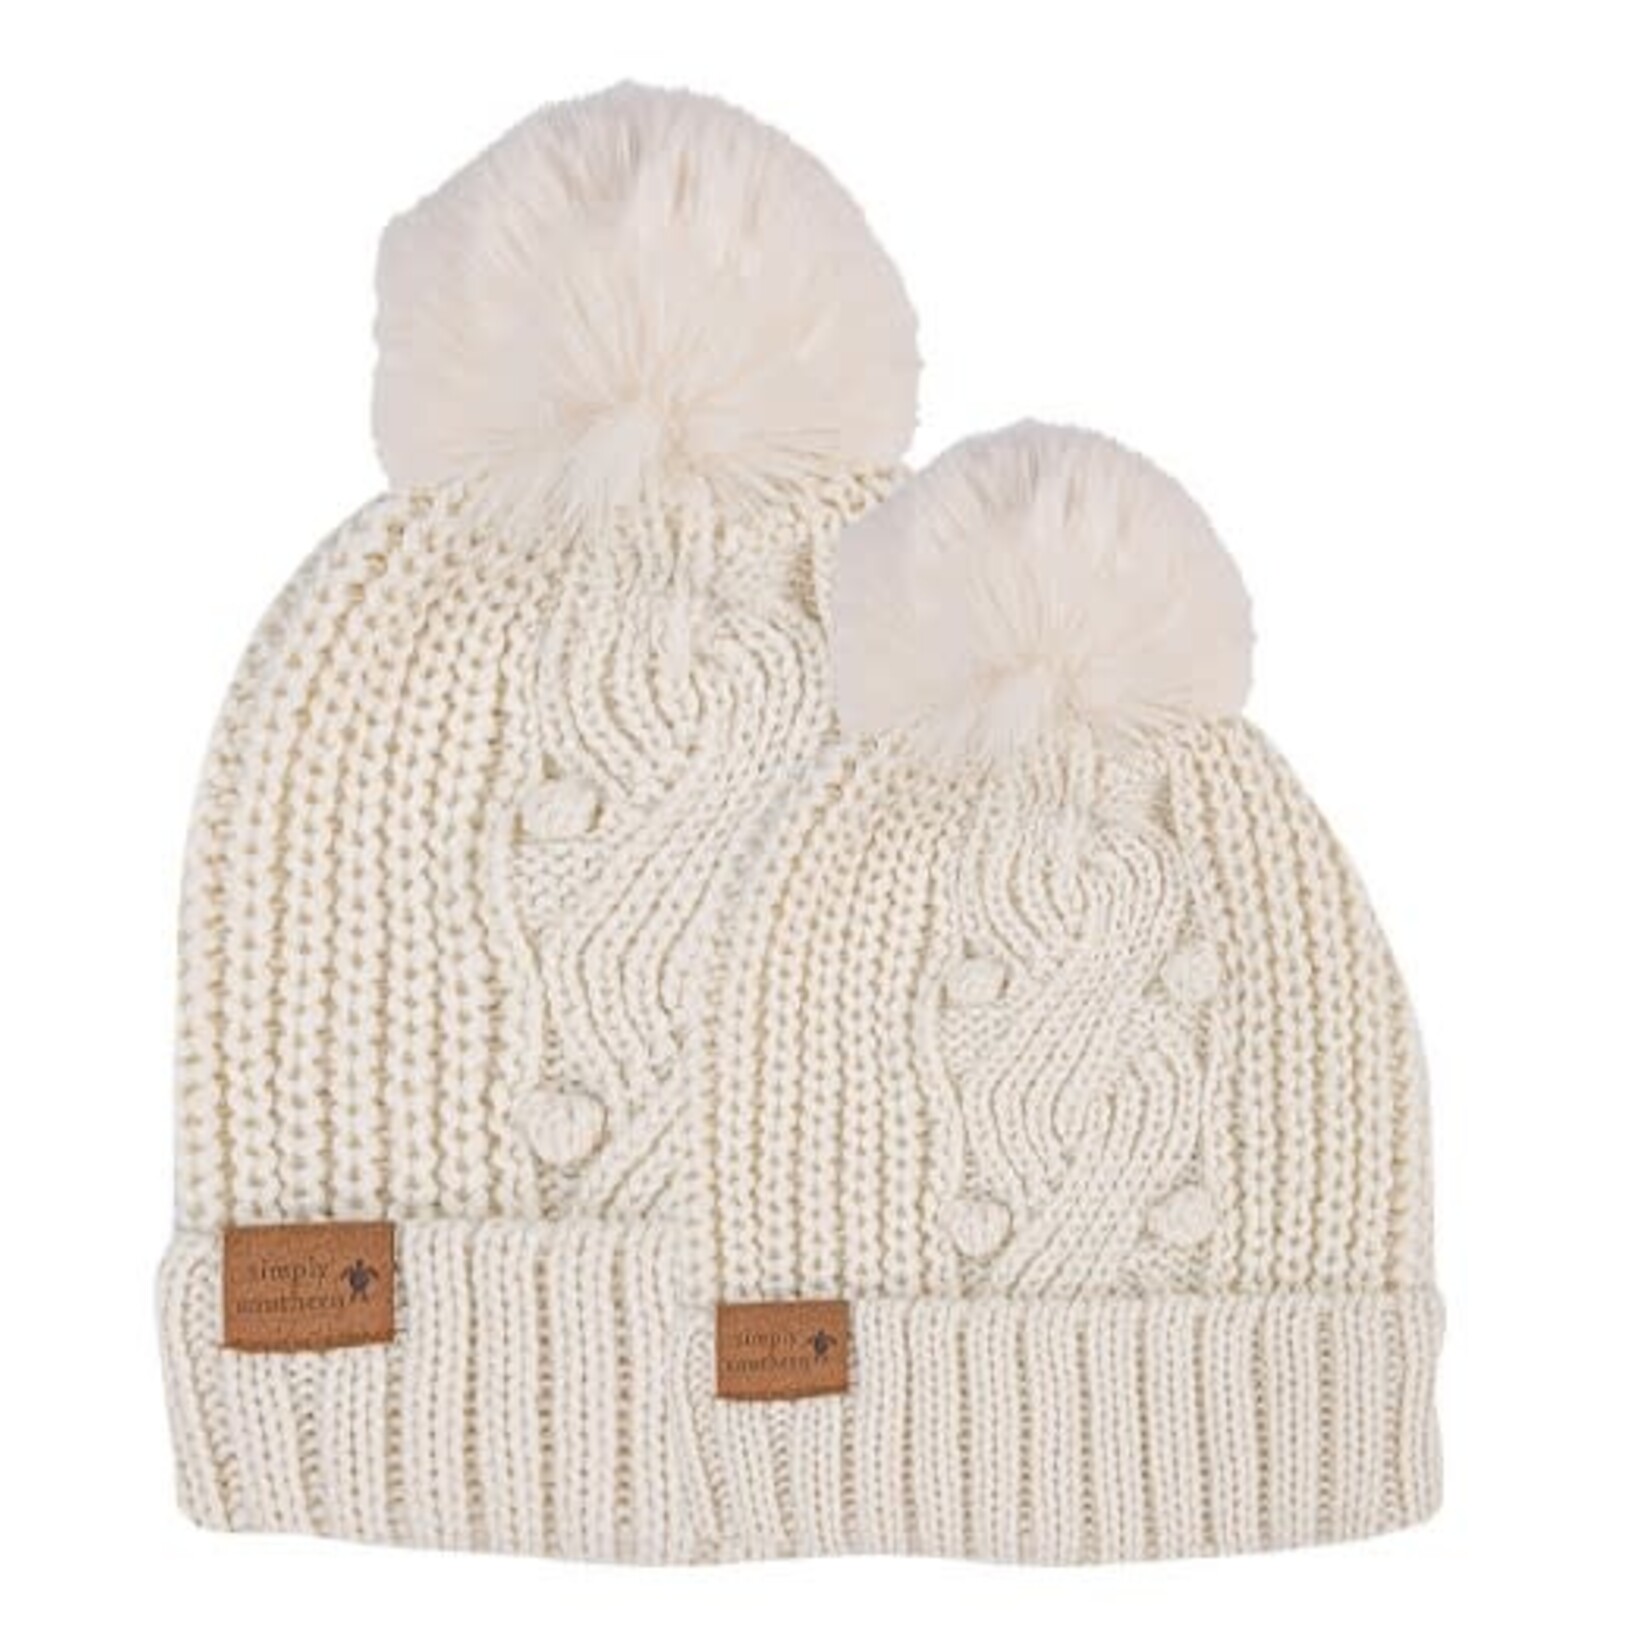 Simply Southern Simply Southern Mommy & Me Beanie Set Cream